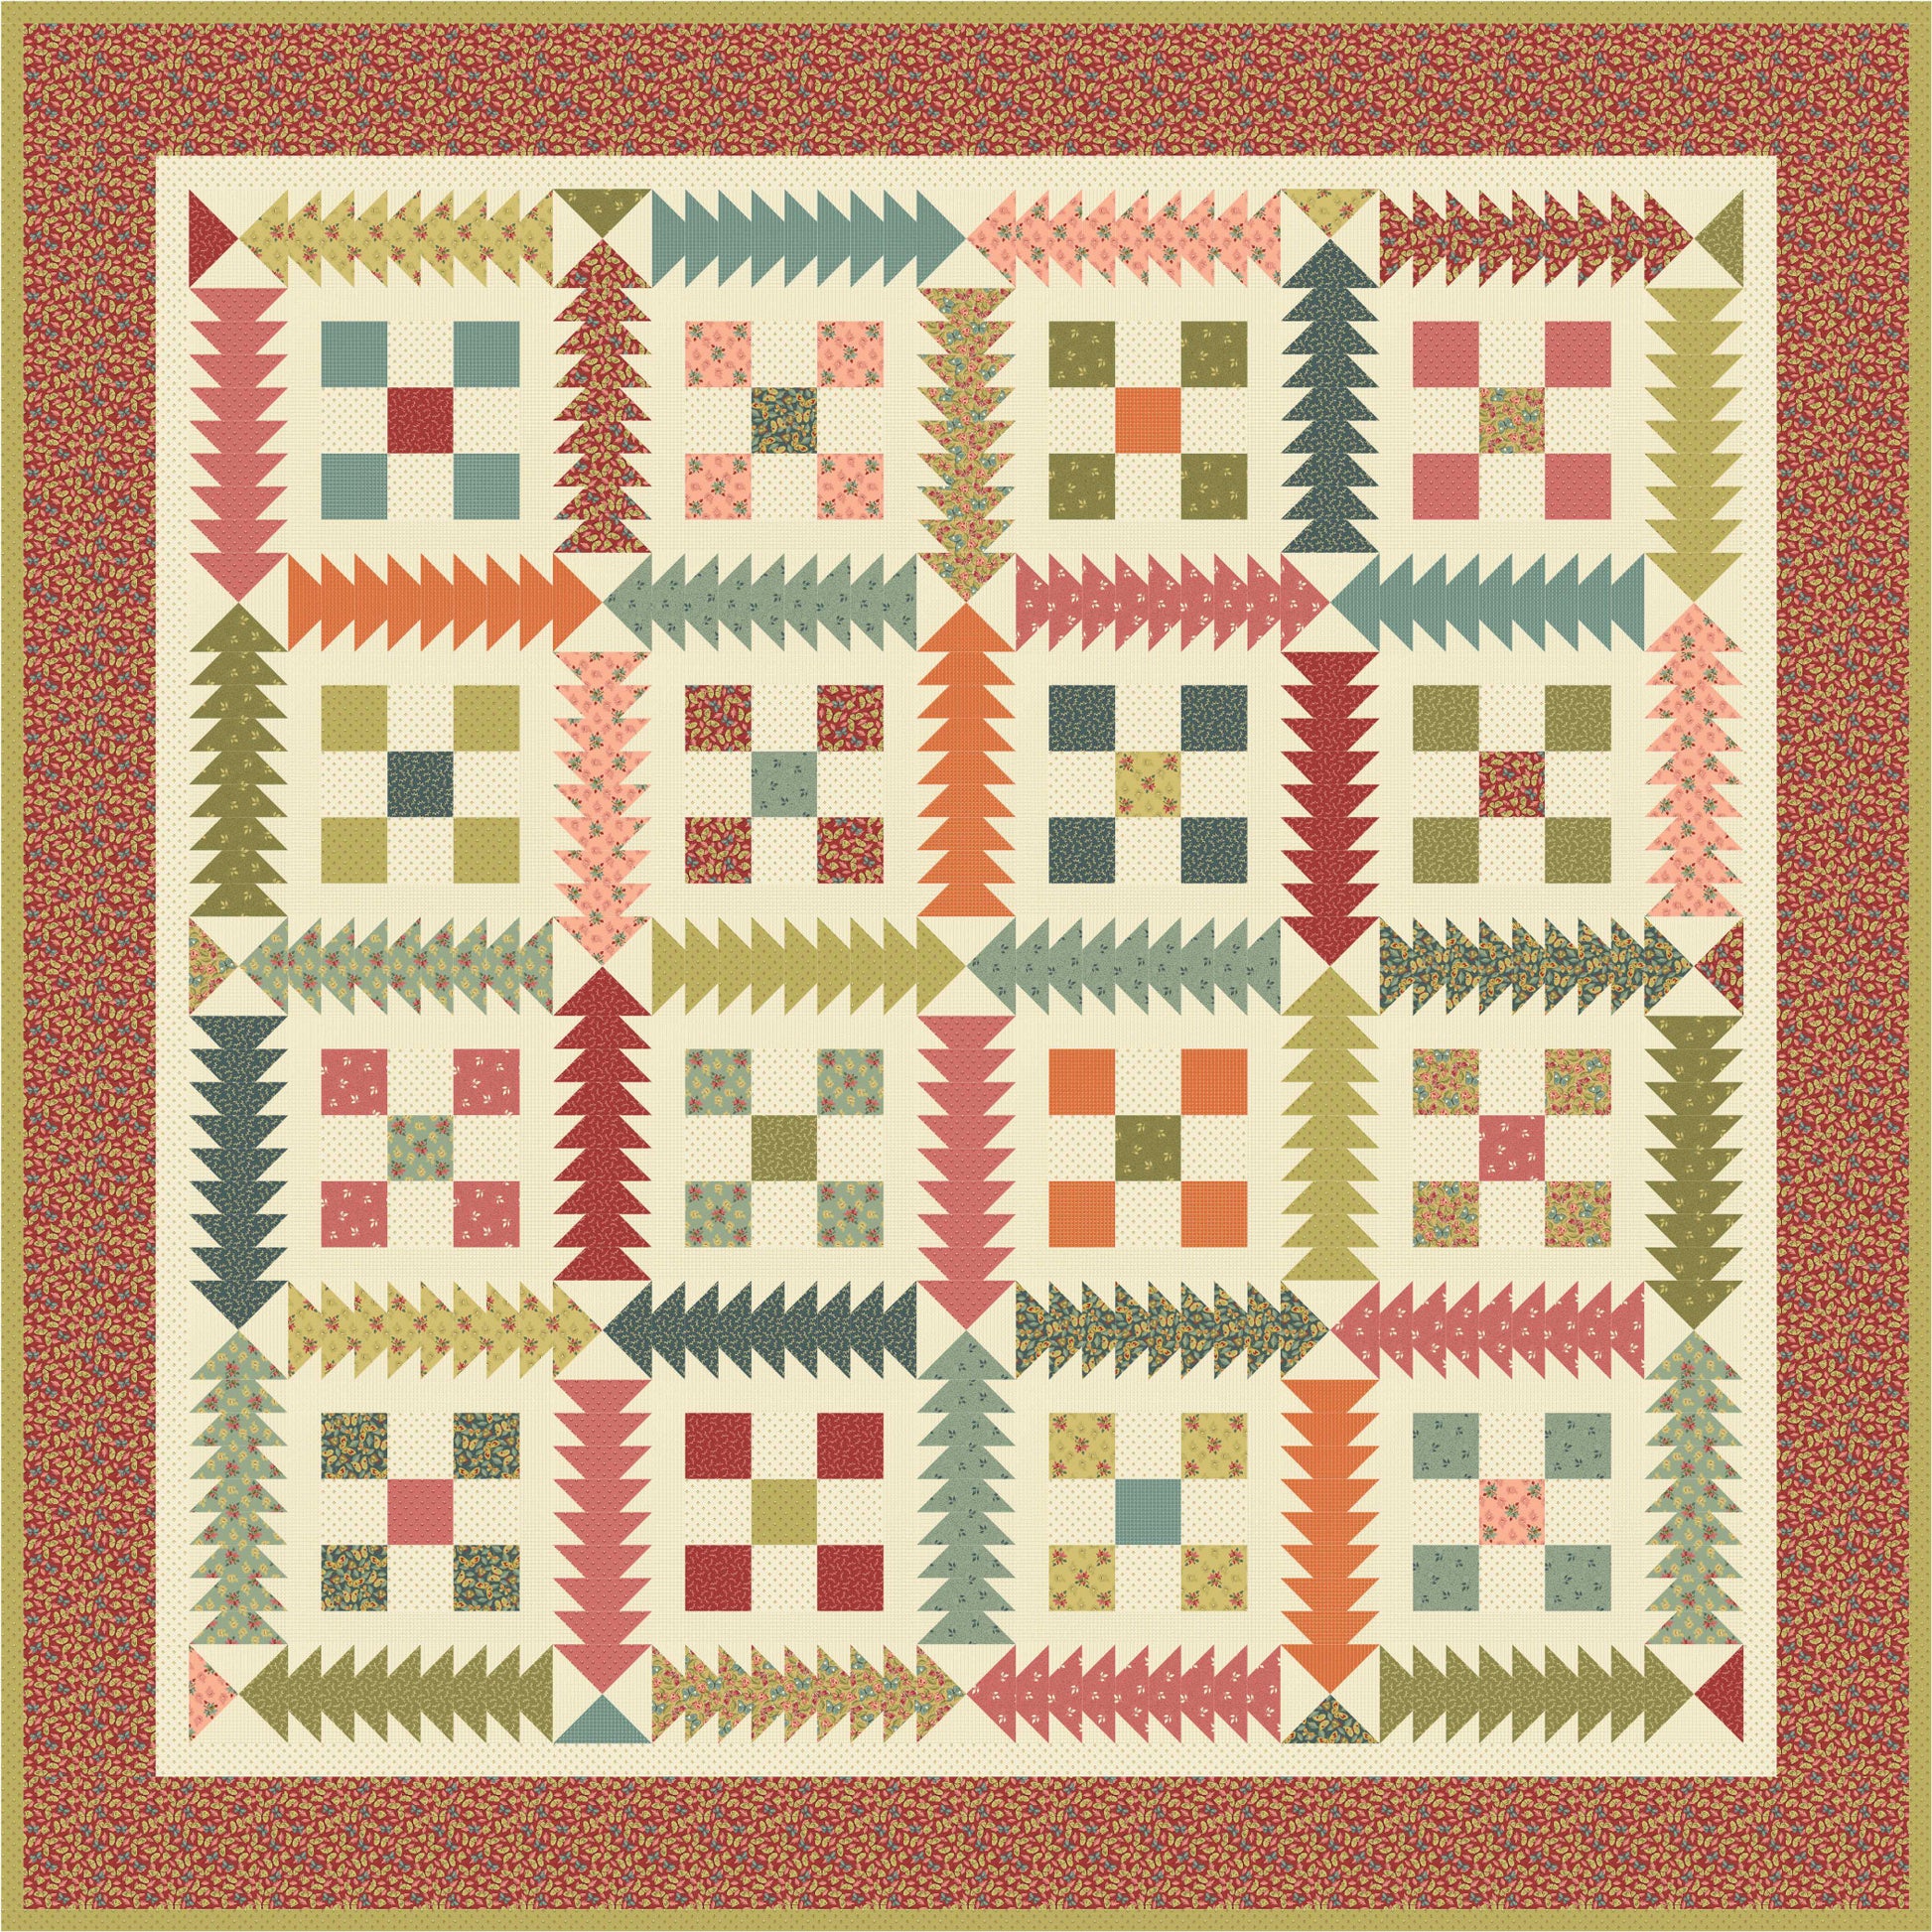 Back & Forth - Zigzag - Rosehip - Licence To Quilt